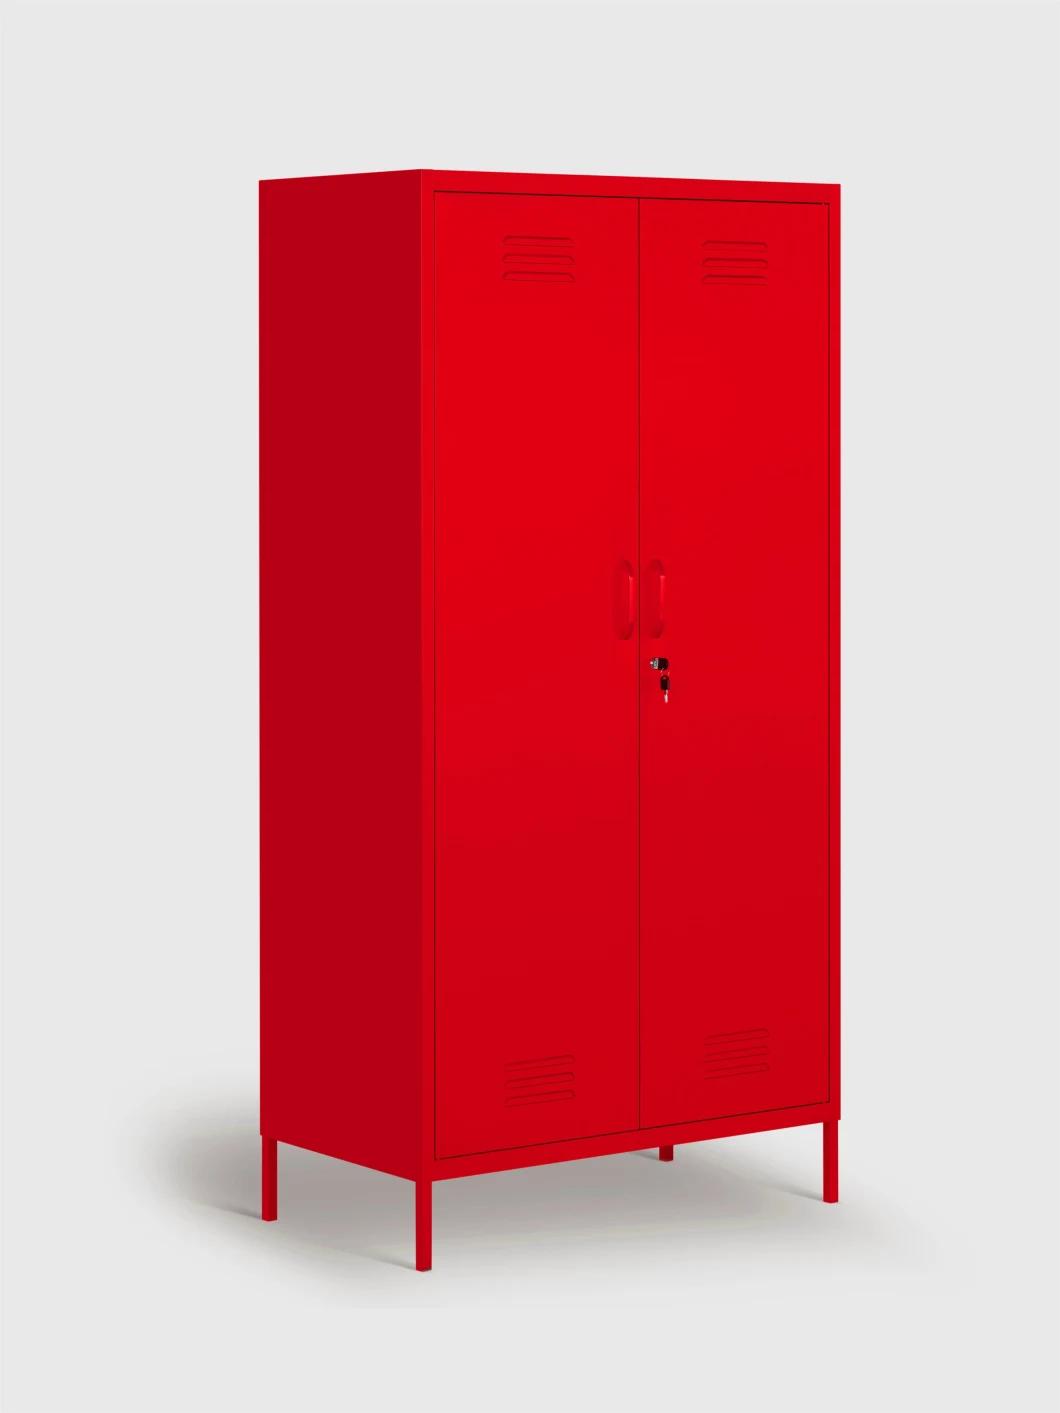 Metal Red Bed Room Two Door Armoire Wardrobe for Home Use